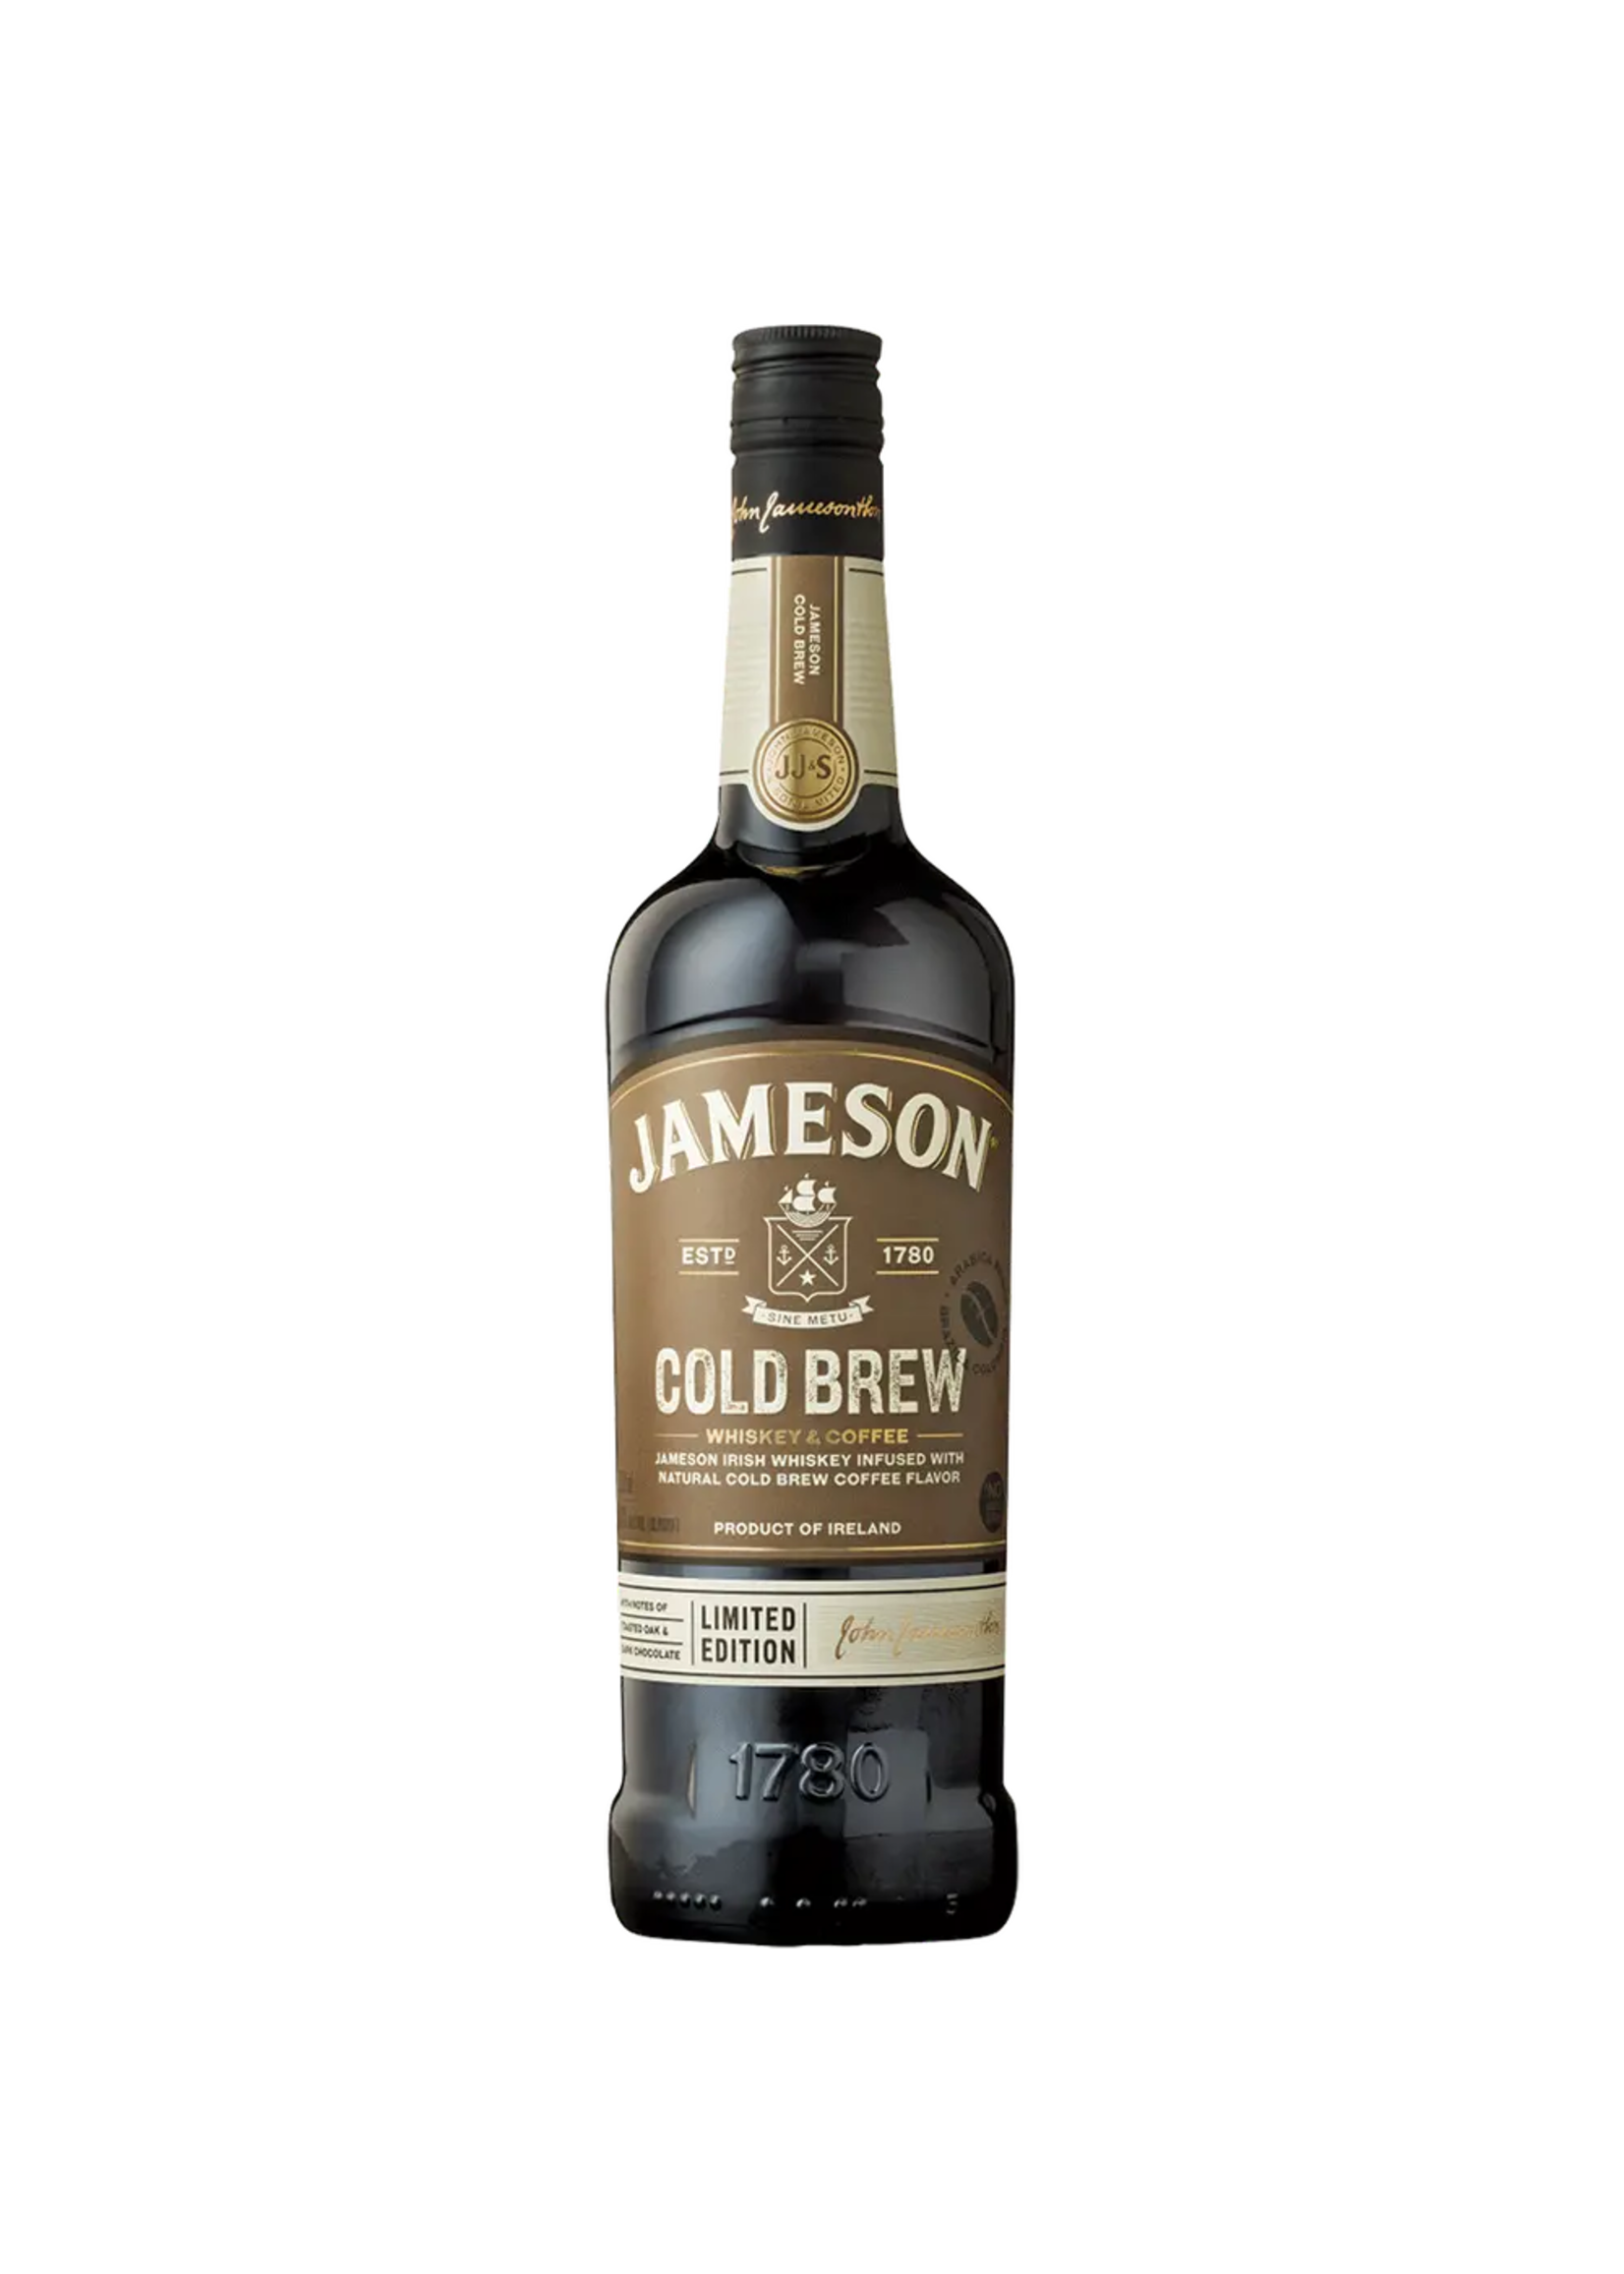 Jameson Cold Brew Limited Edition 60Proof 750ml